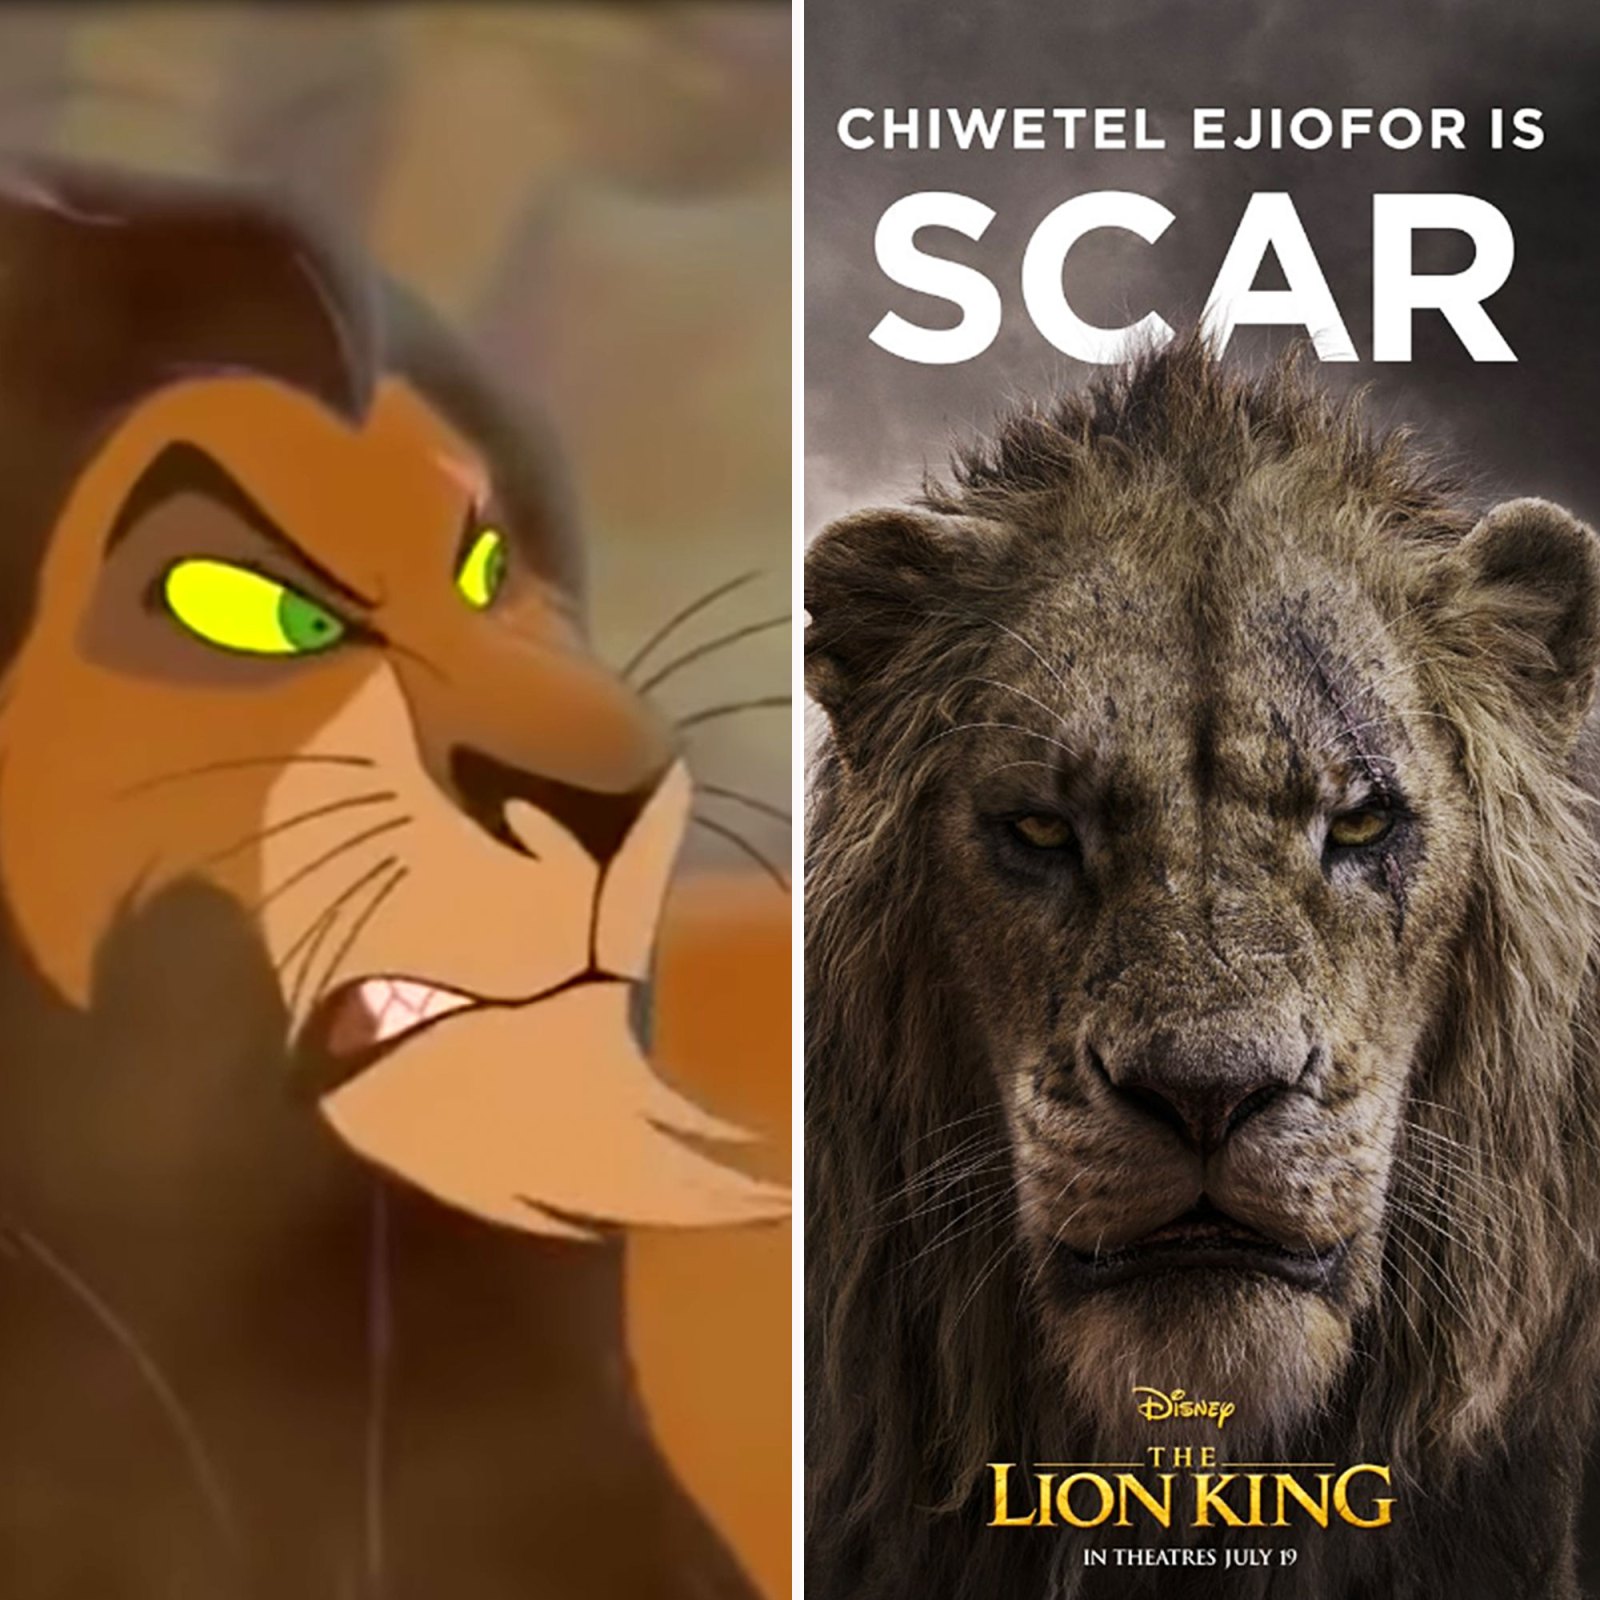 The Lion King Turns 25 Comparing the Animated and Live-Action Characters